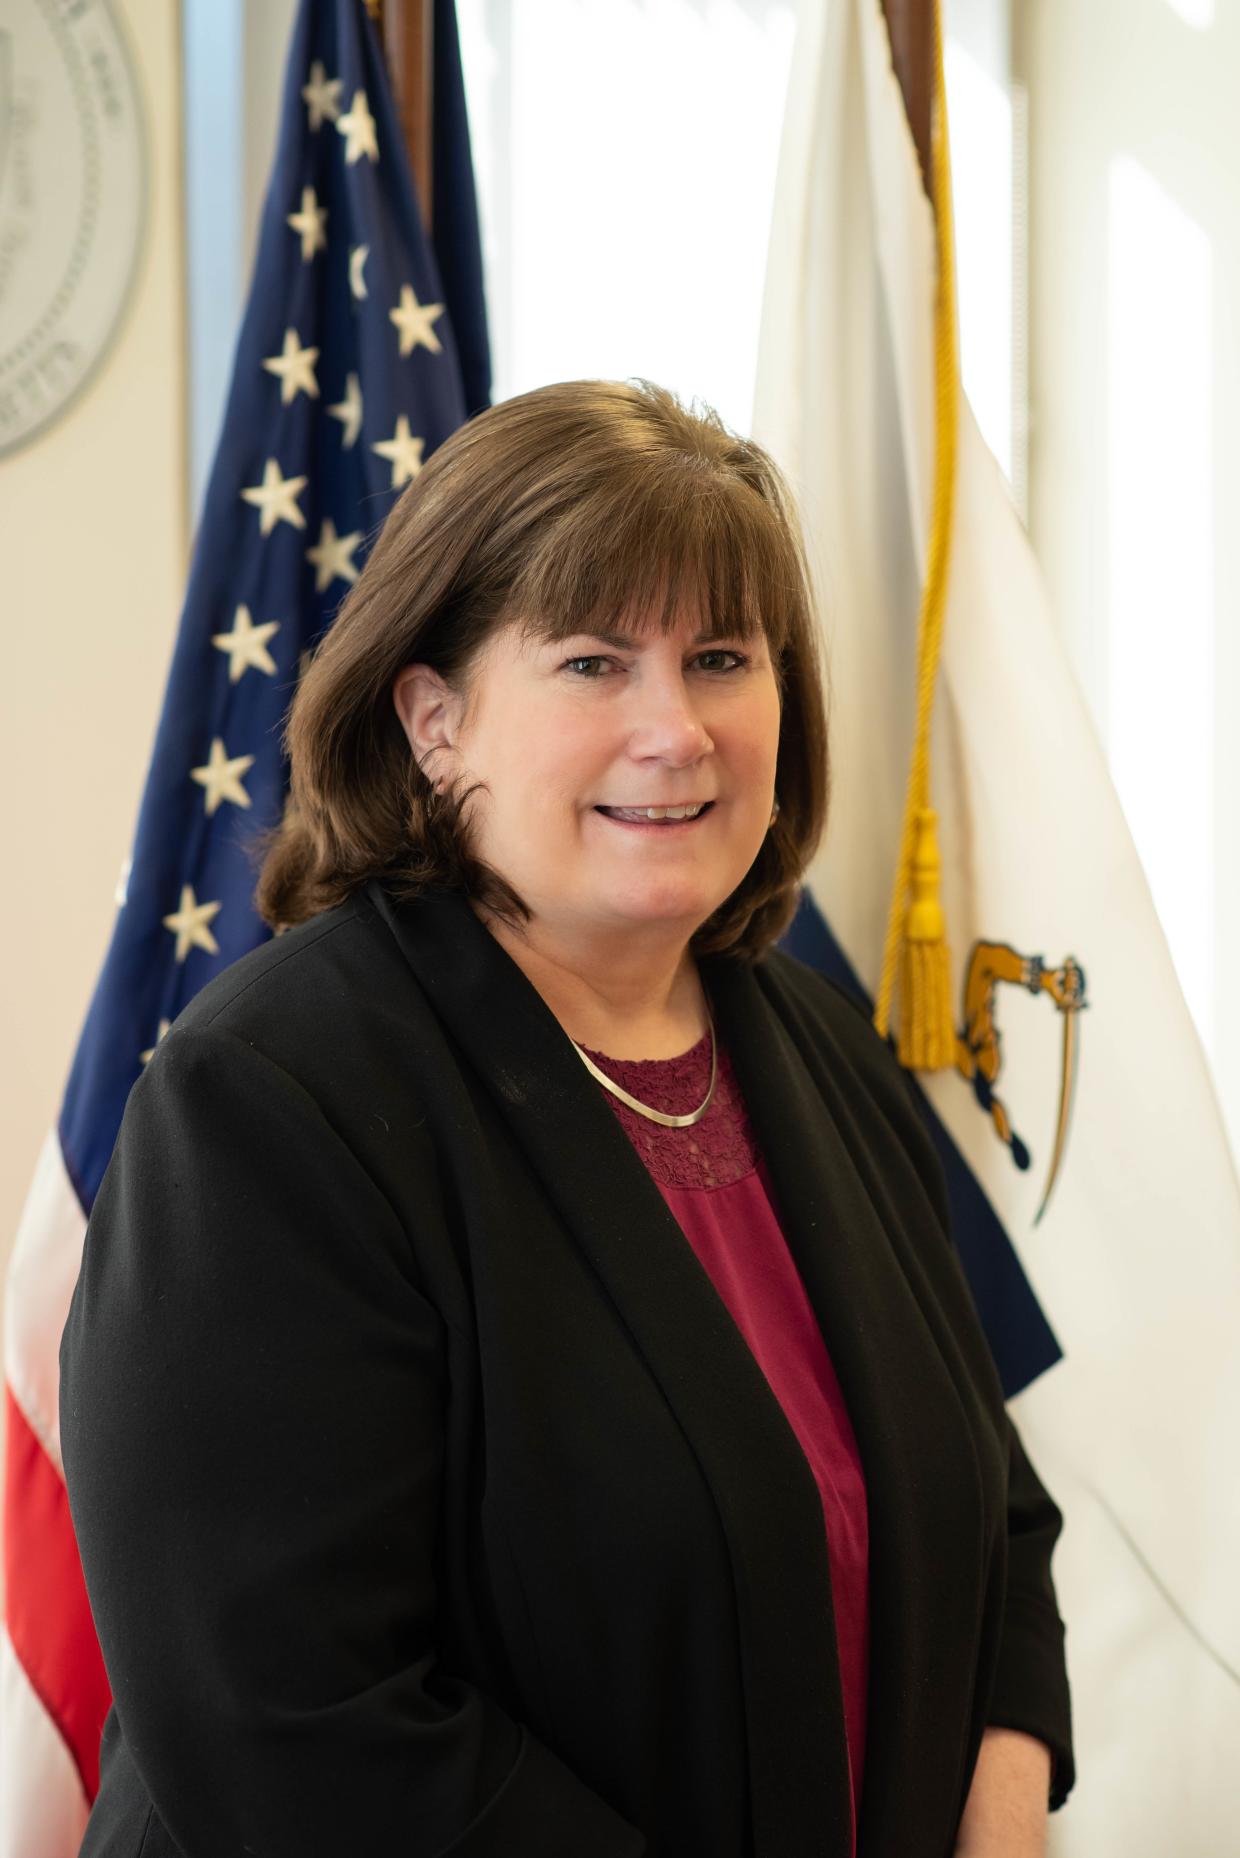 Acting Commissioner Mary Sheehan